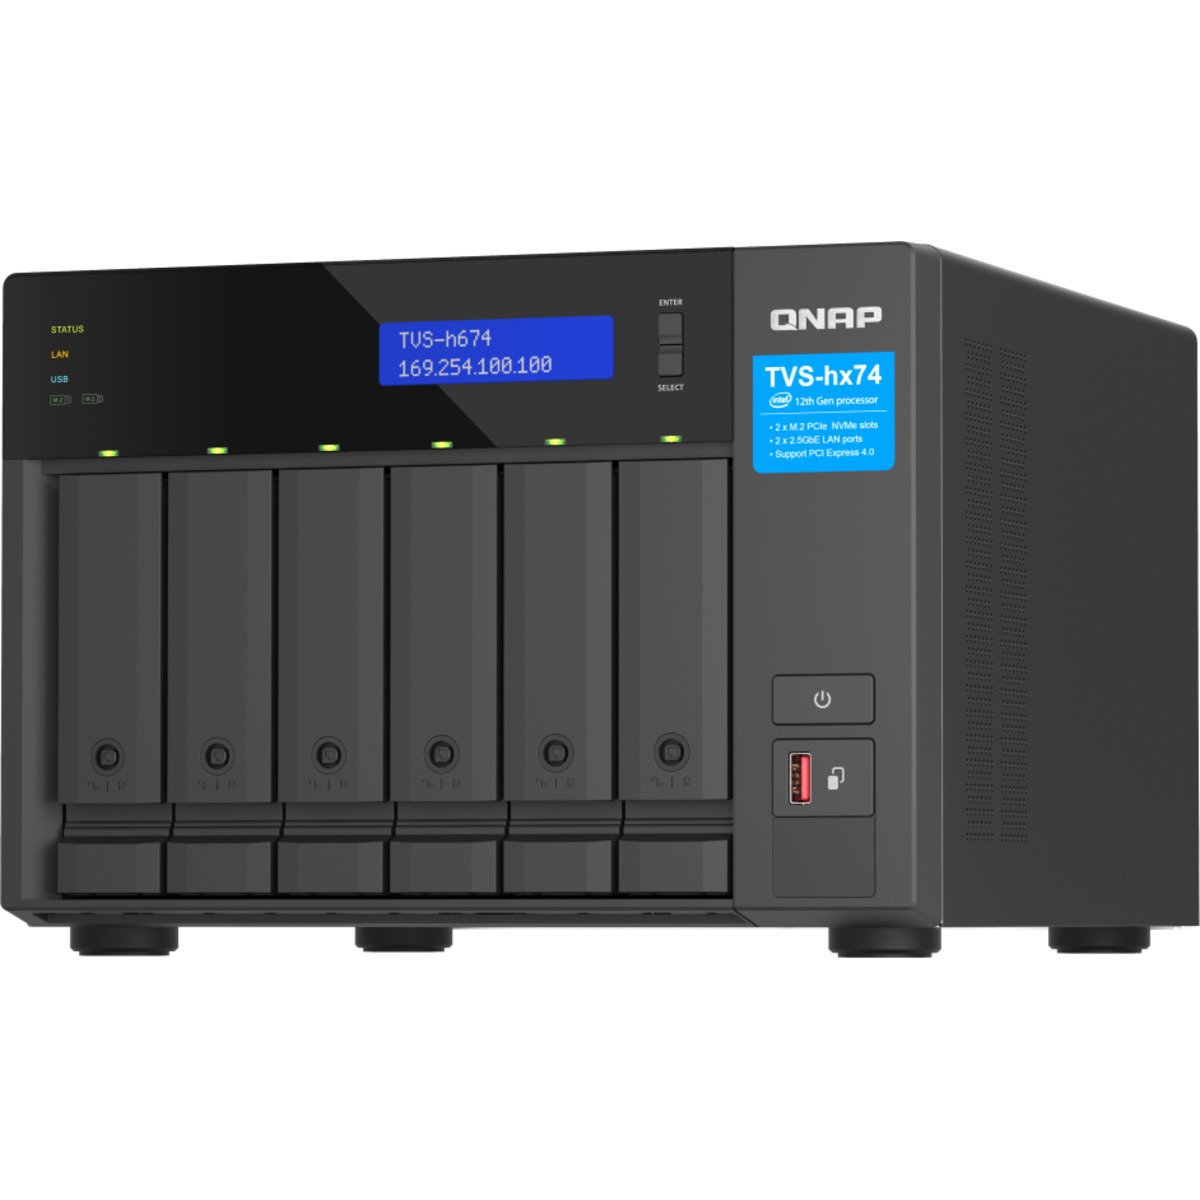 QNAP TVS-h674 Core i5 30tb 6-Bay Desktop Multimedia / Power User / Business NAS - Network Attached Storage Device 3x10tb Seagate EXOS X18 ST10000NM018G 3.5 7200rpm SATA 6Gb/s HDD ENTERPRISE Class Drives Installed - Burn-In Tested TVS-h674 Core i5